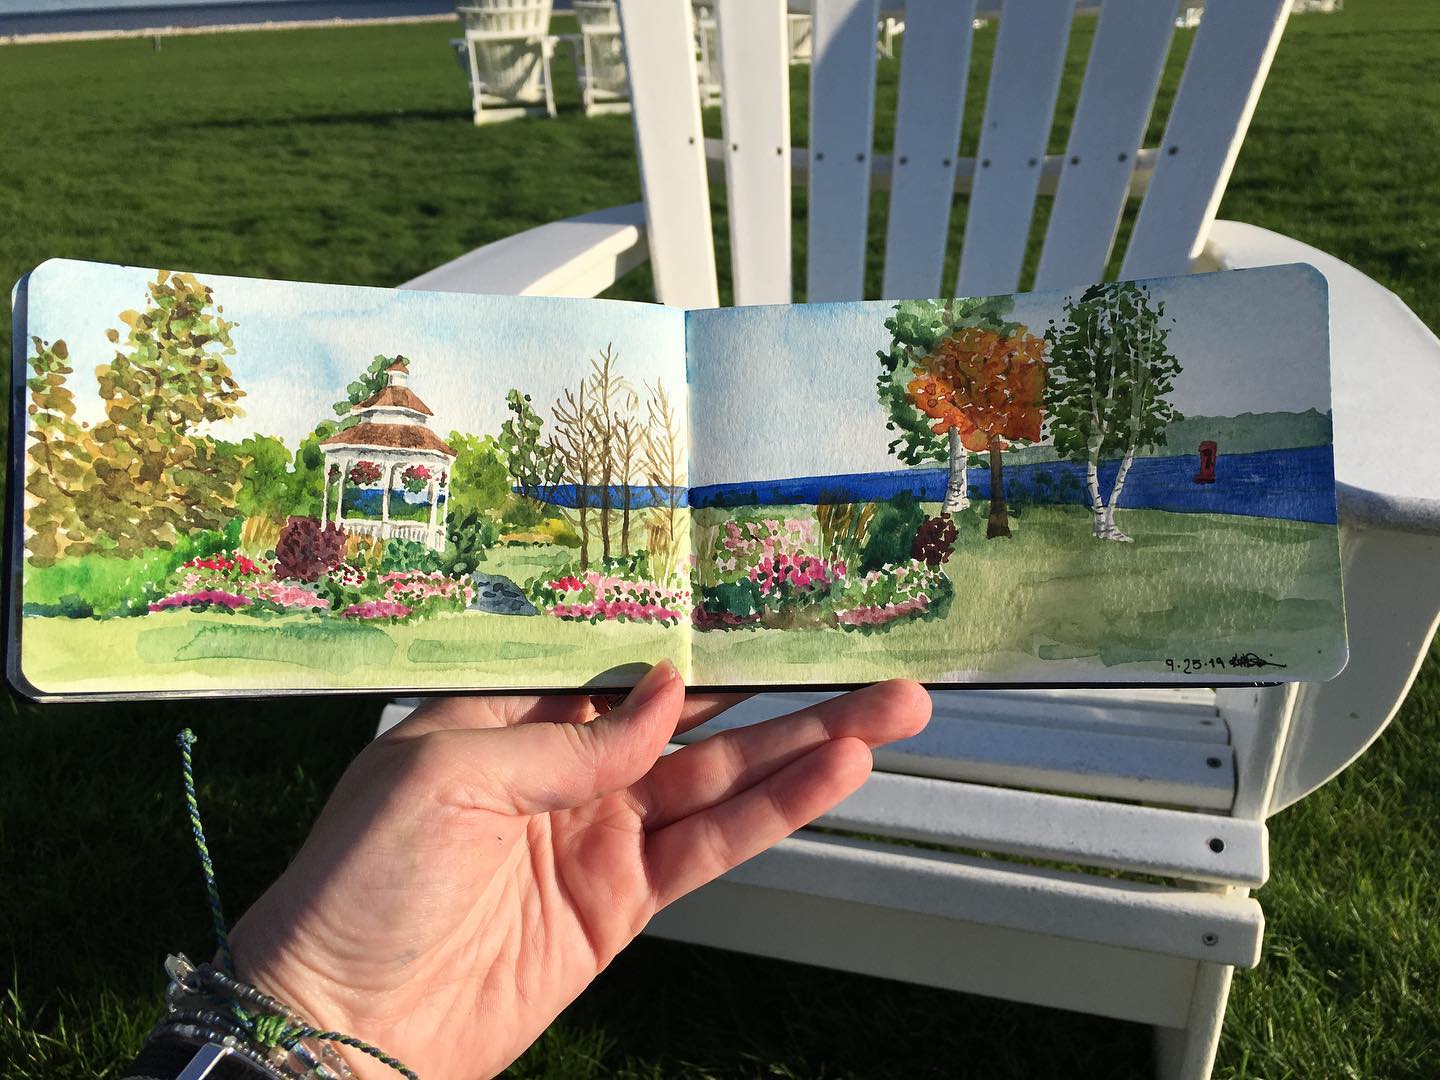 A hand holds a work of art in front of an adirondack chair on the lawn at Mackinac Island's Mission Point Resort